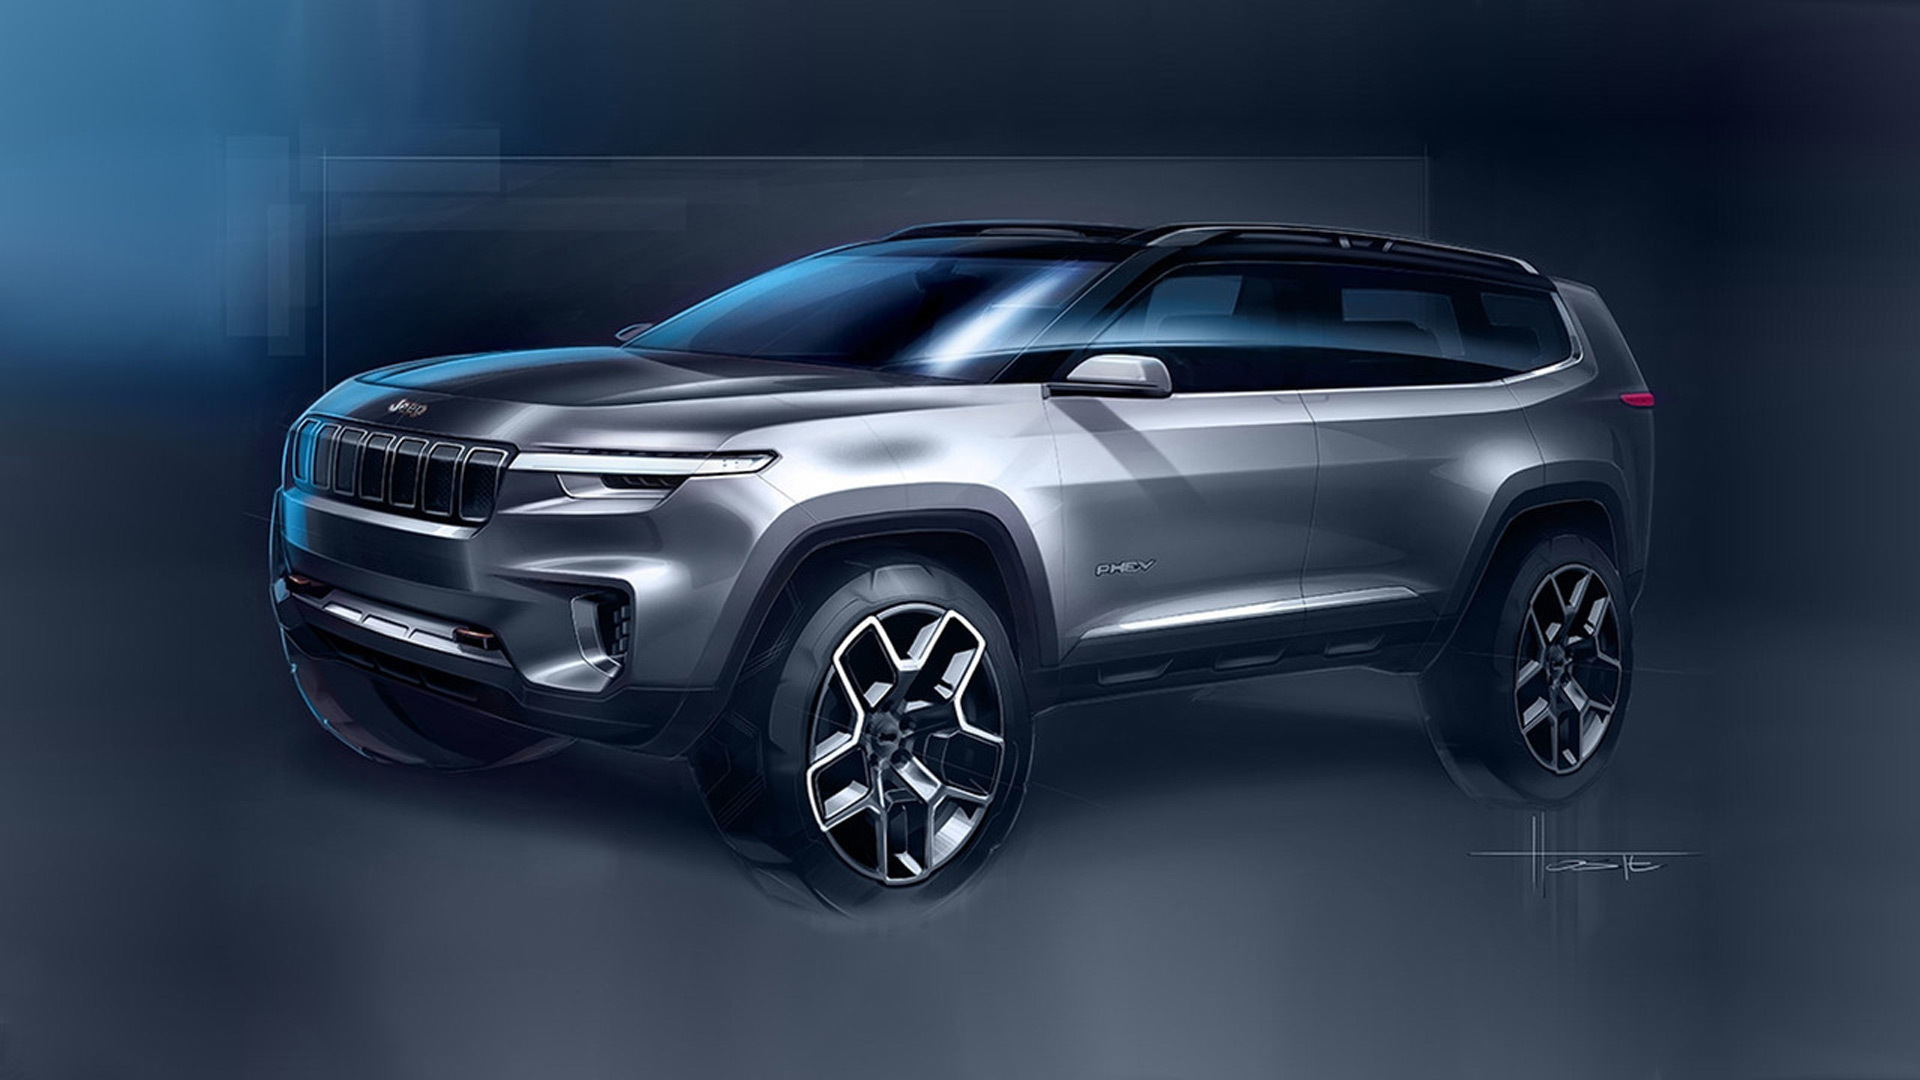 Teaser for Jeep concept debuting at 2017 Shanghai auto show